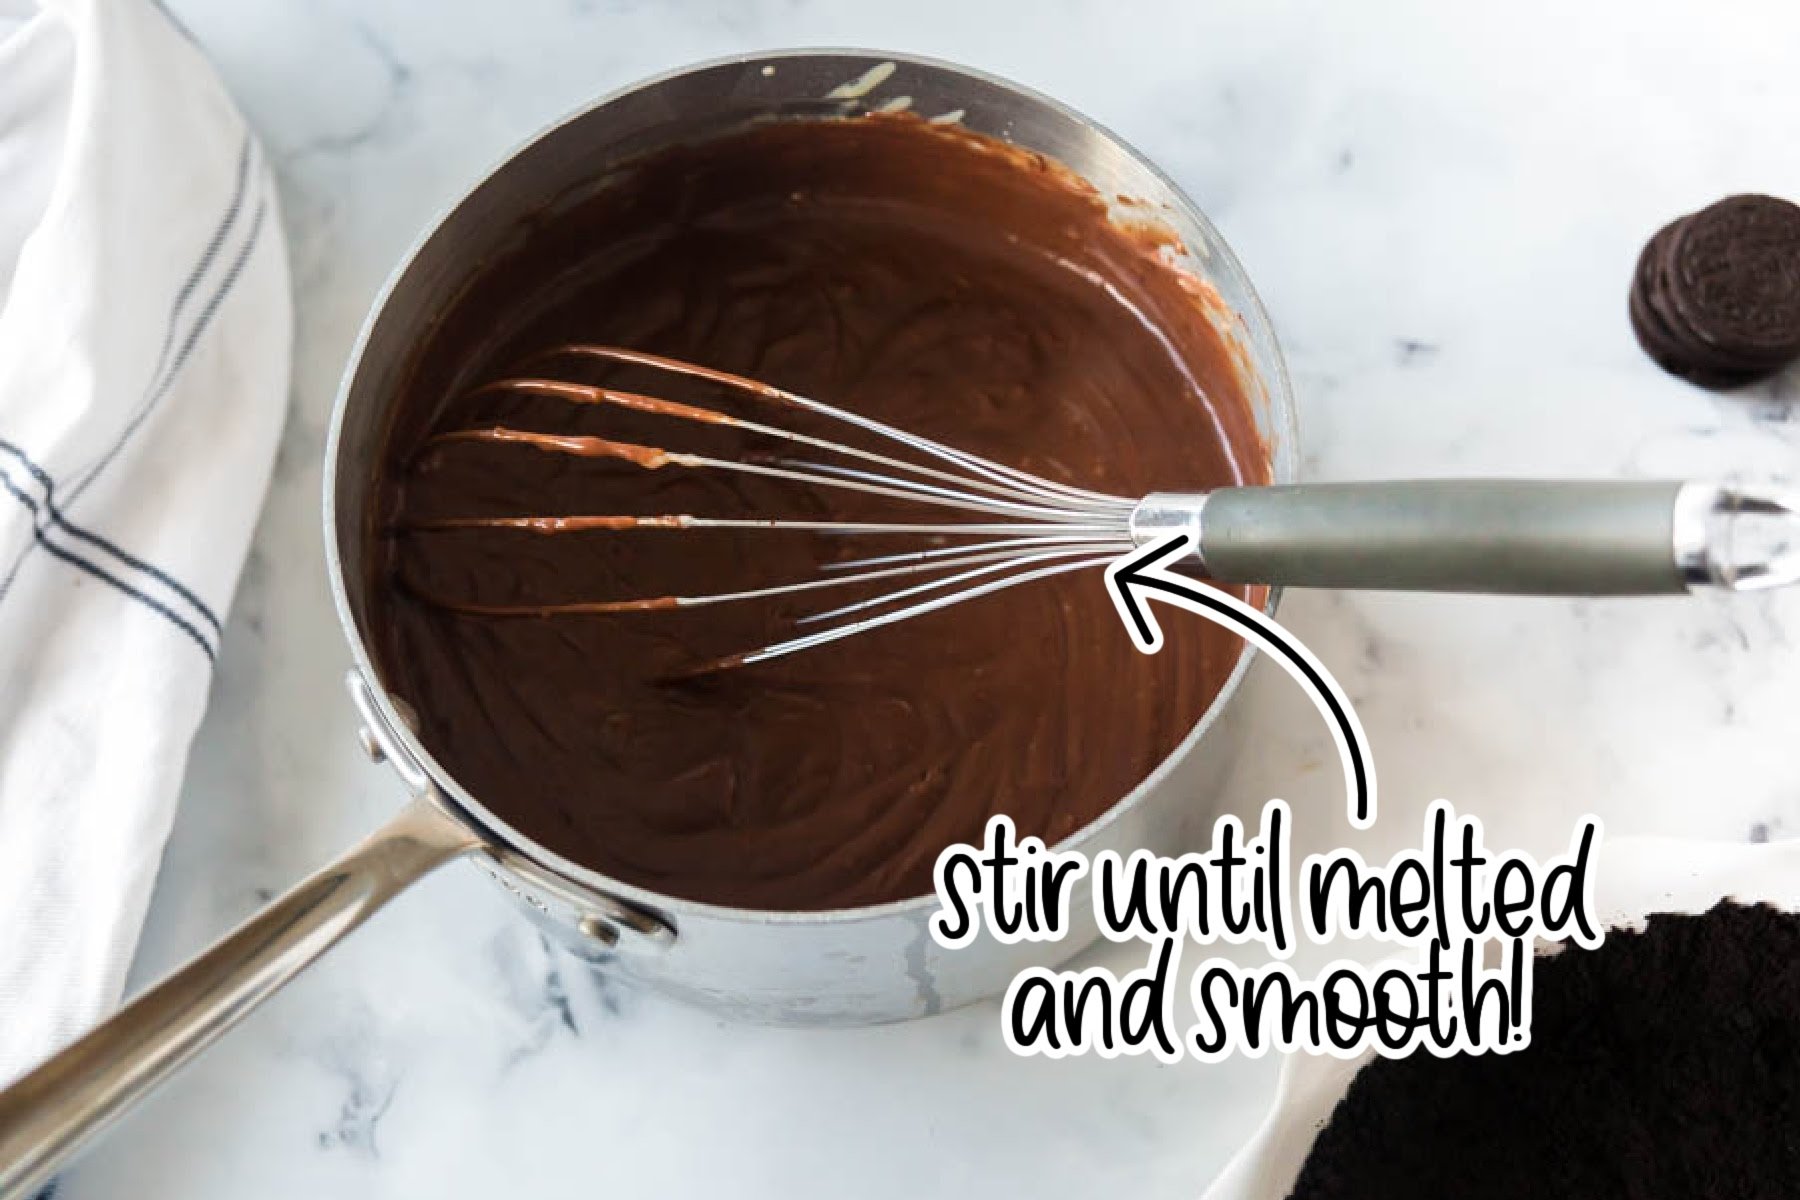 Whisking the chocolate custard mixture in saucepan and text "stir until melted and smooth."